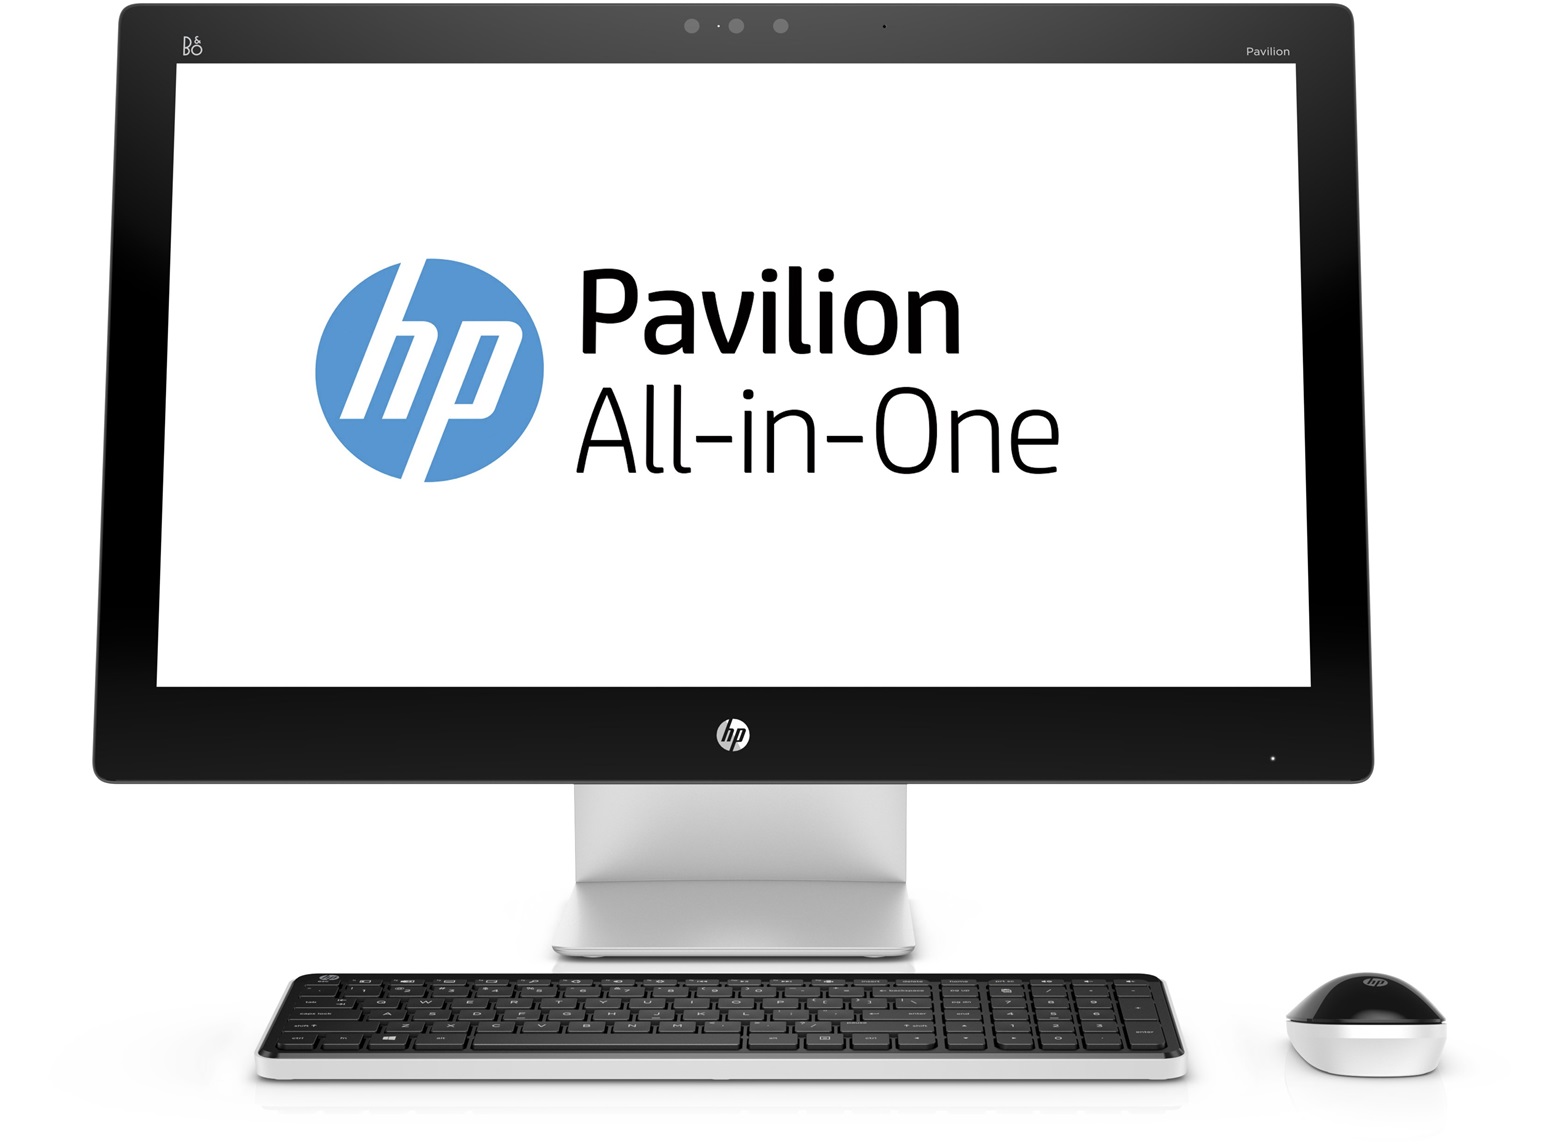 HP Pavilion Touch All in One 27 - i7 6700 - 16G - 2TB - VGA GT930 2G